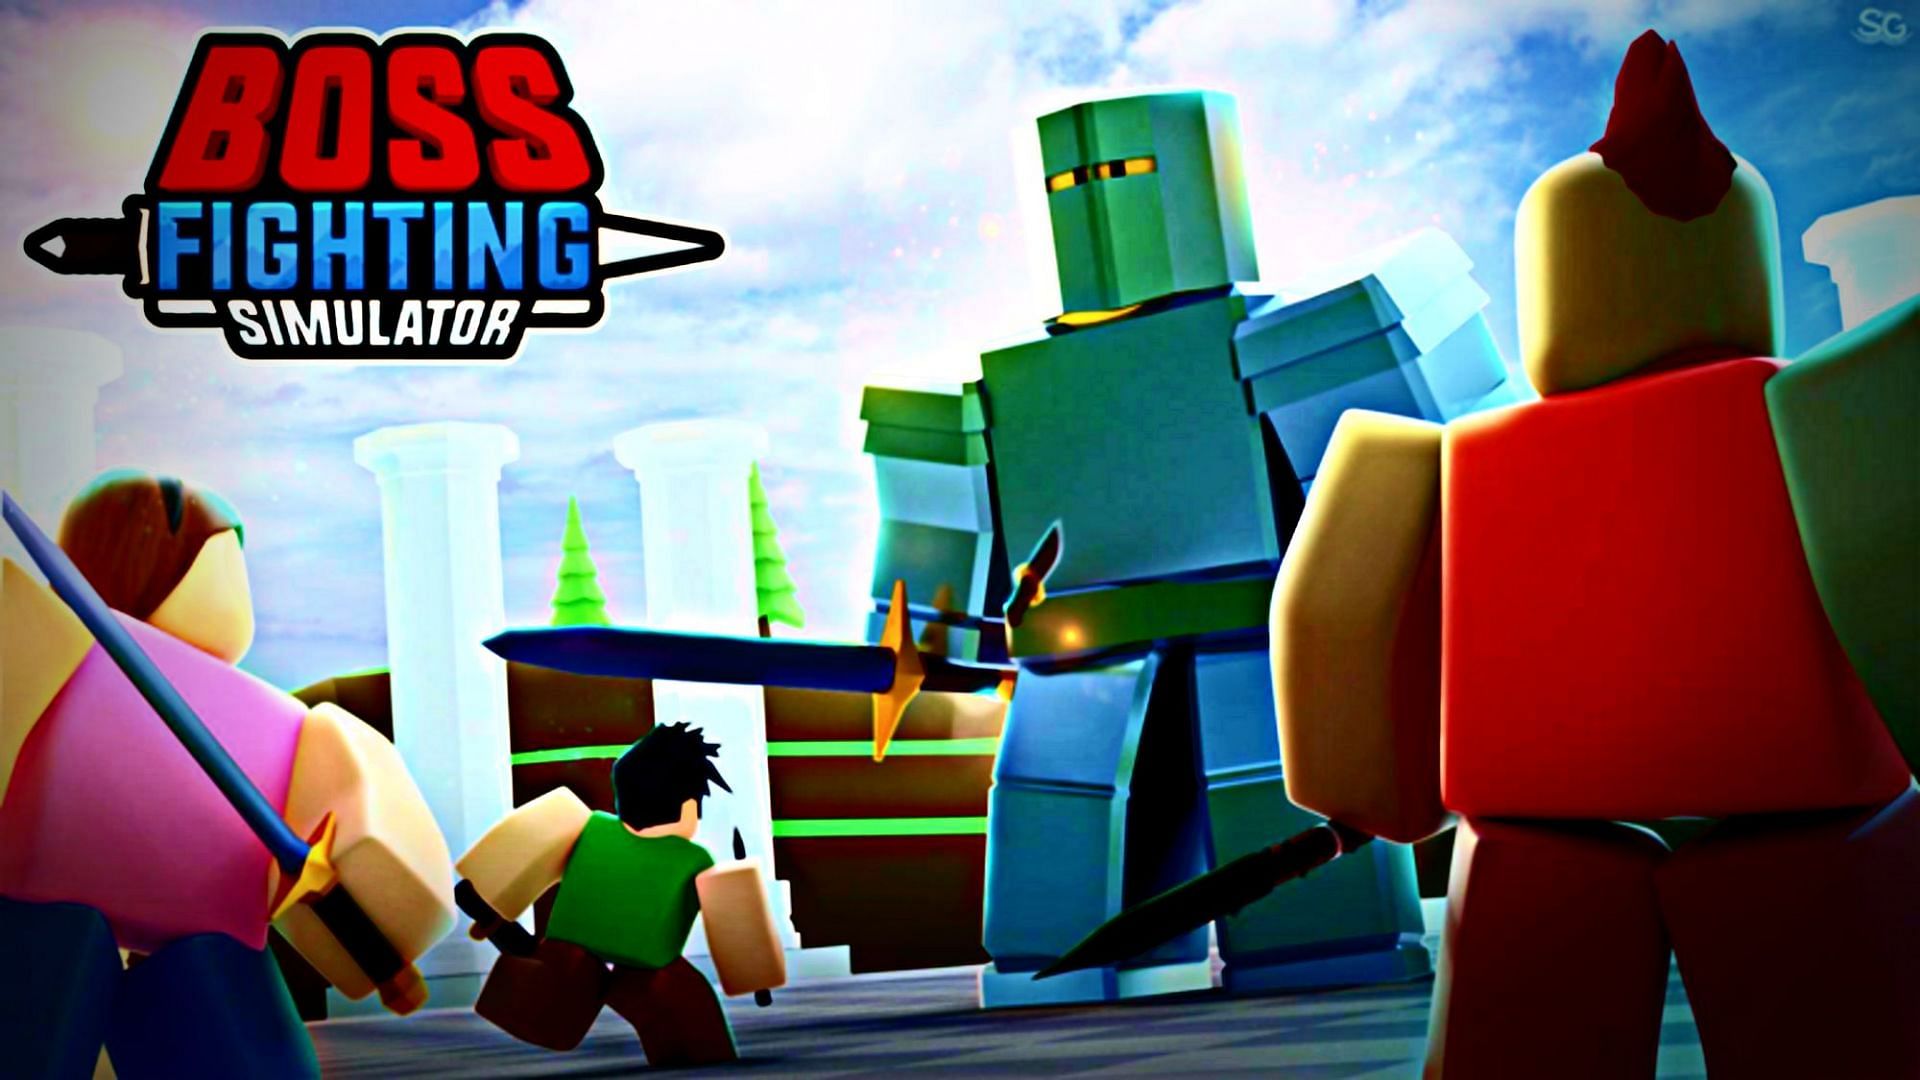 Boss Fighting Simulator Codes In Roblox Free Runes Crystals And More August 2022 